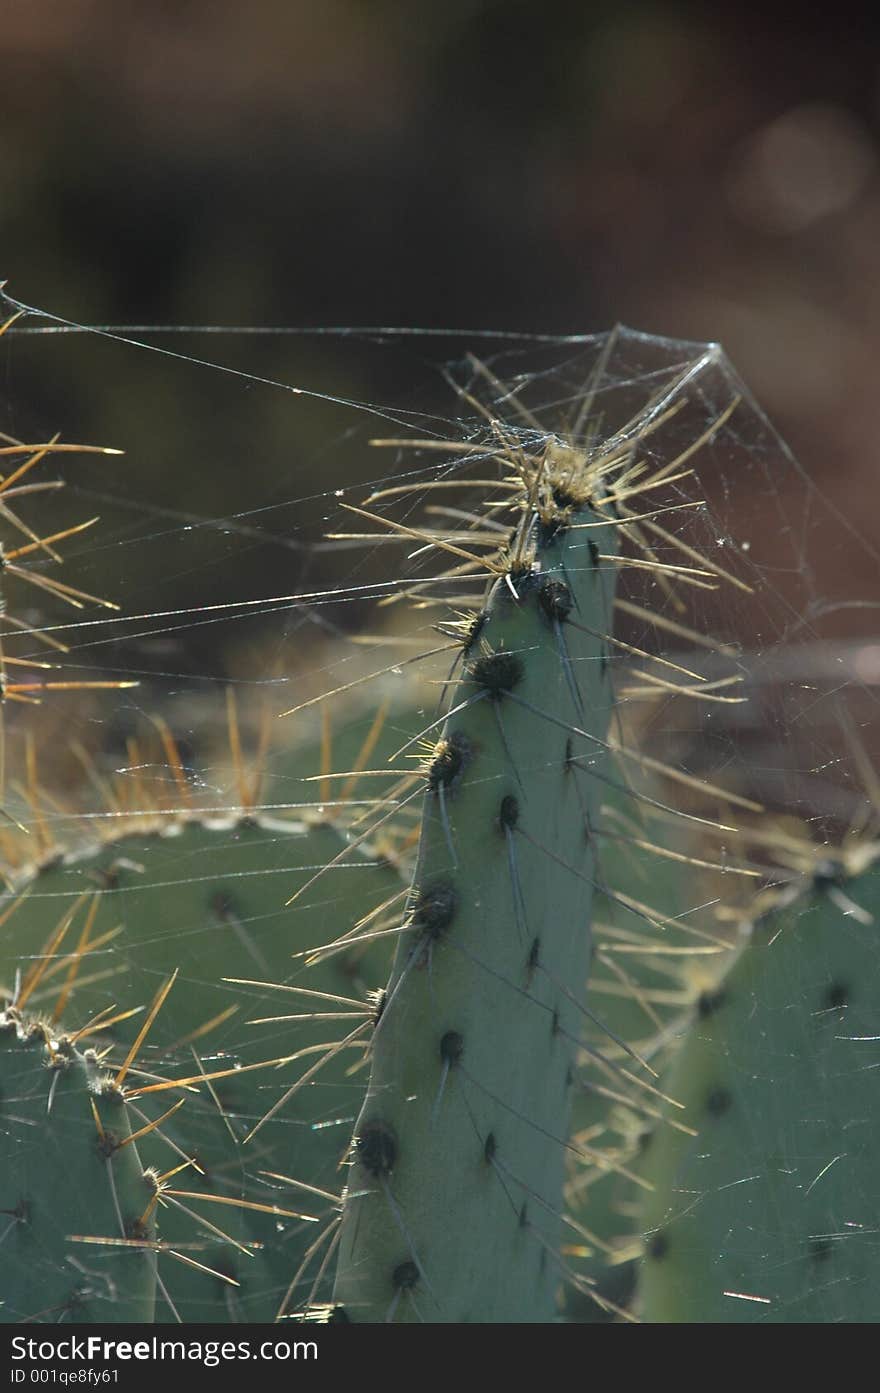 Web covered catus spines possible metaphor use